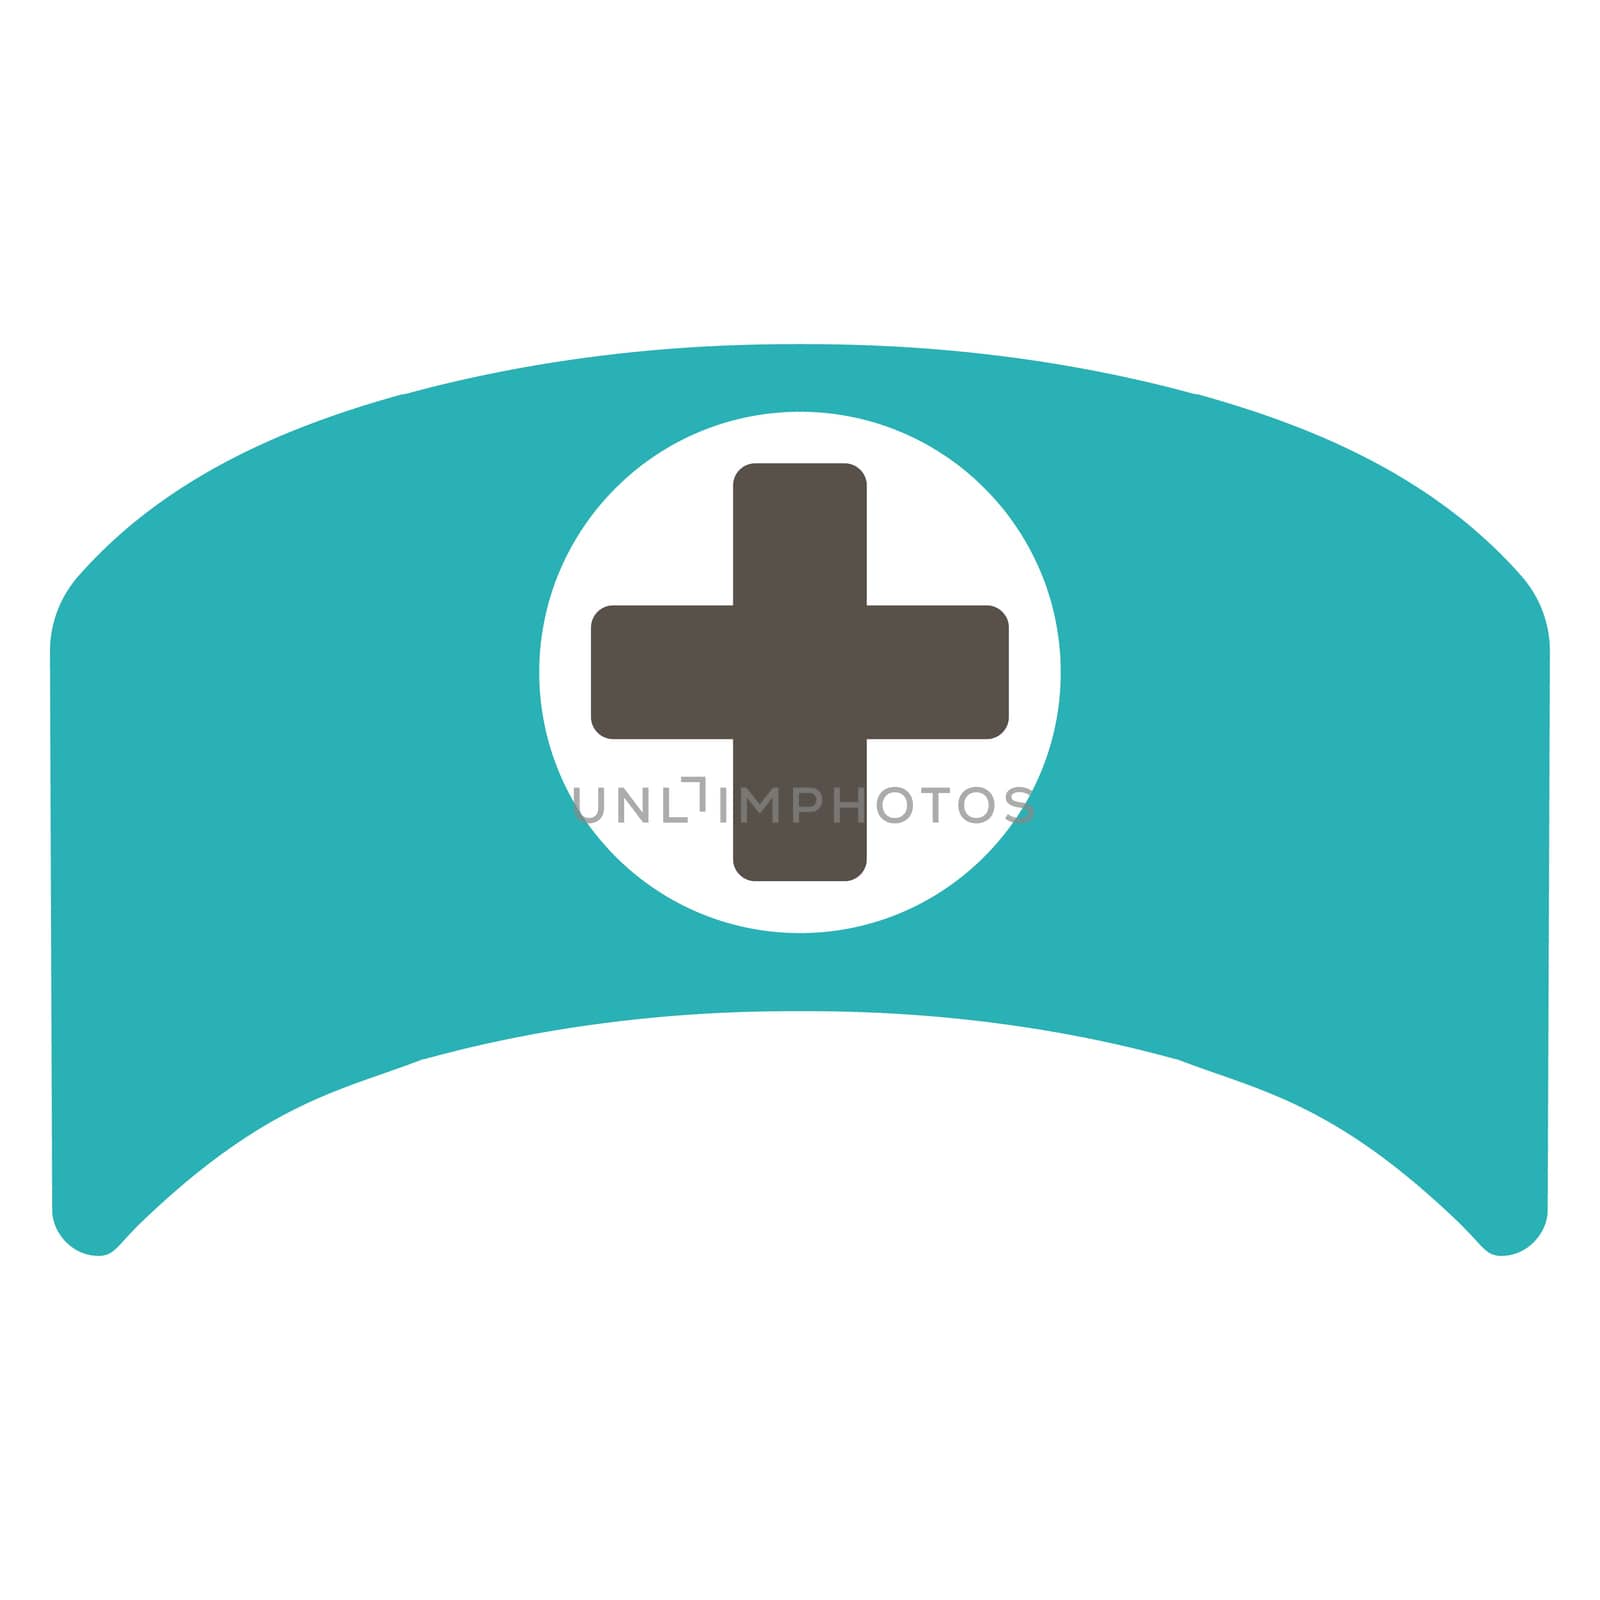 Doctor Cap raster icon. Style is bicolor flat symbol, grey and cyan colors, rounded angles, white background.